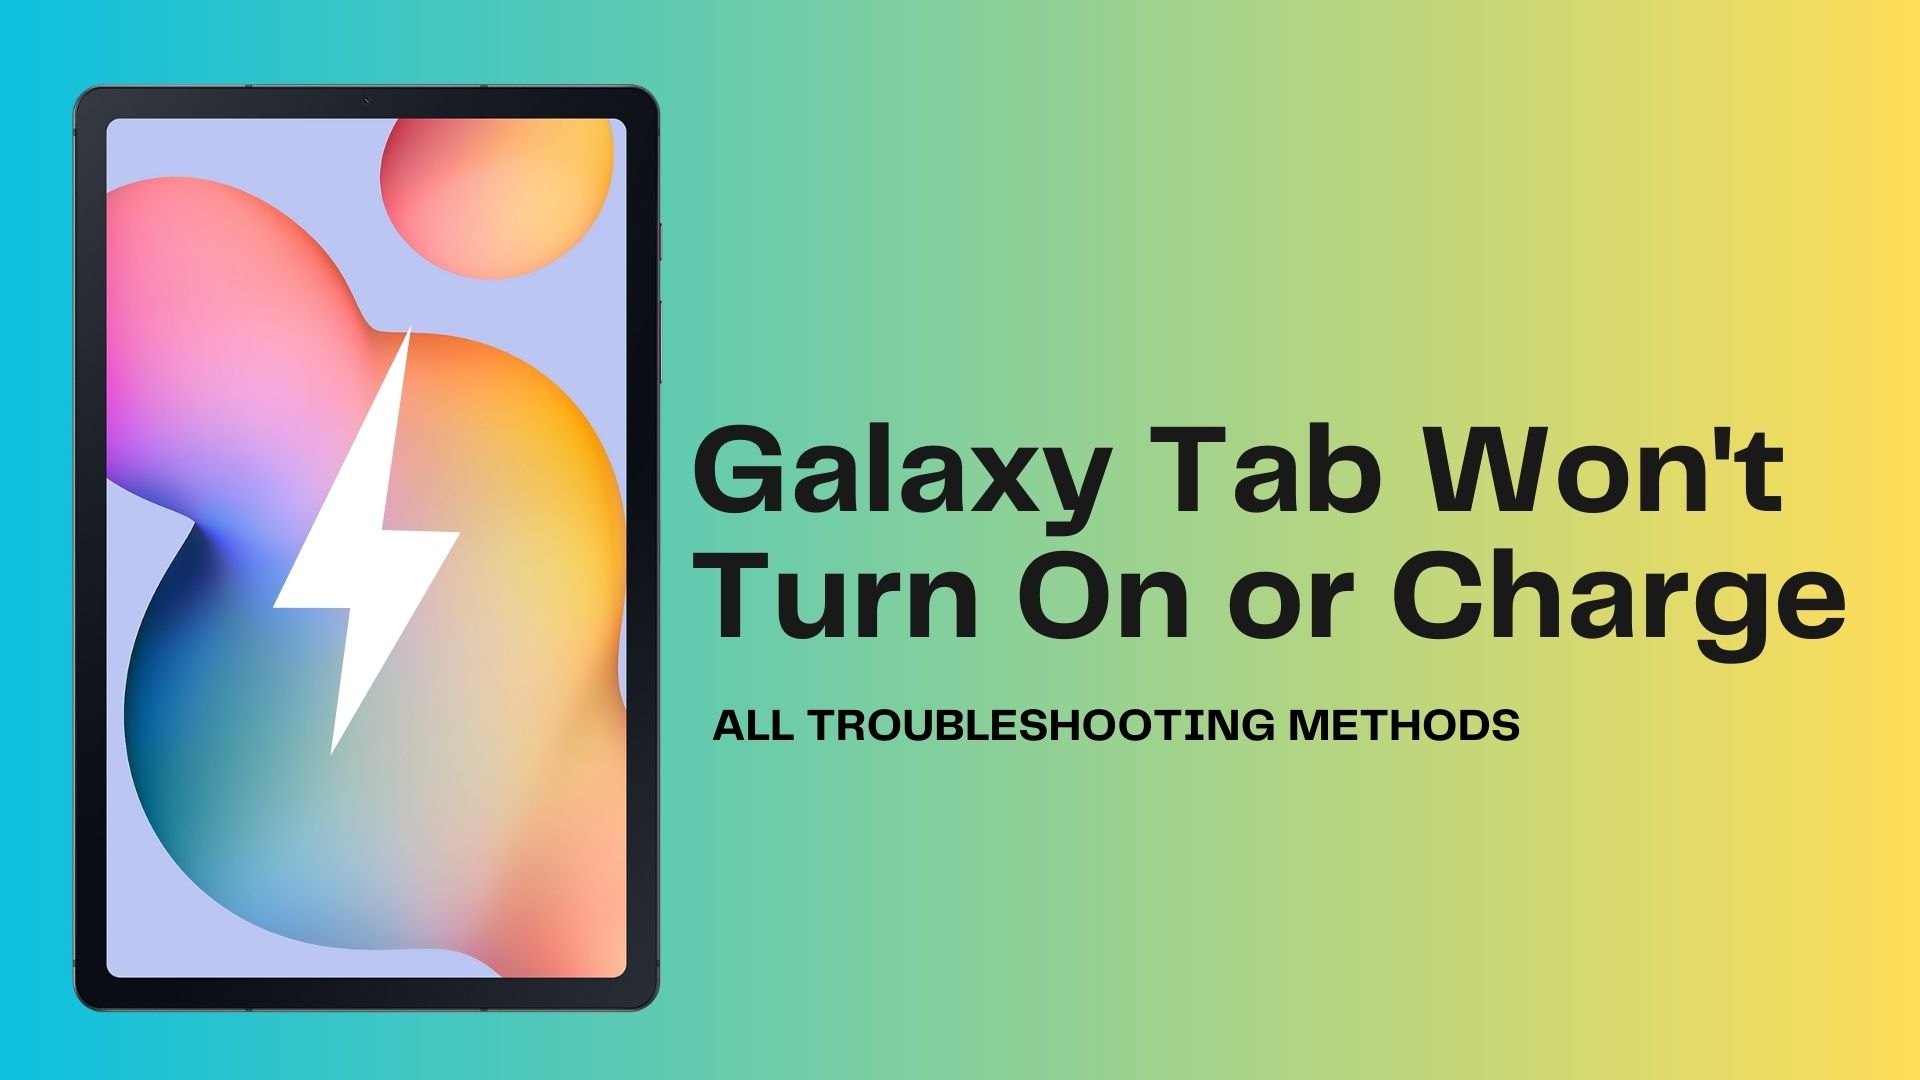 Samsung Galaxy Tab won't turn on or charge: What you can do